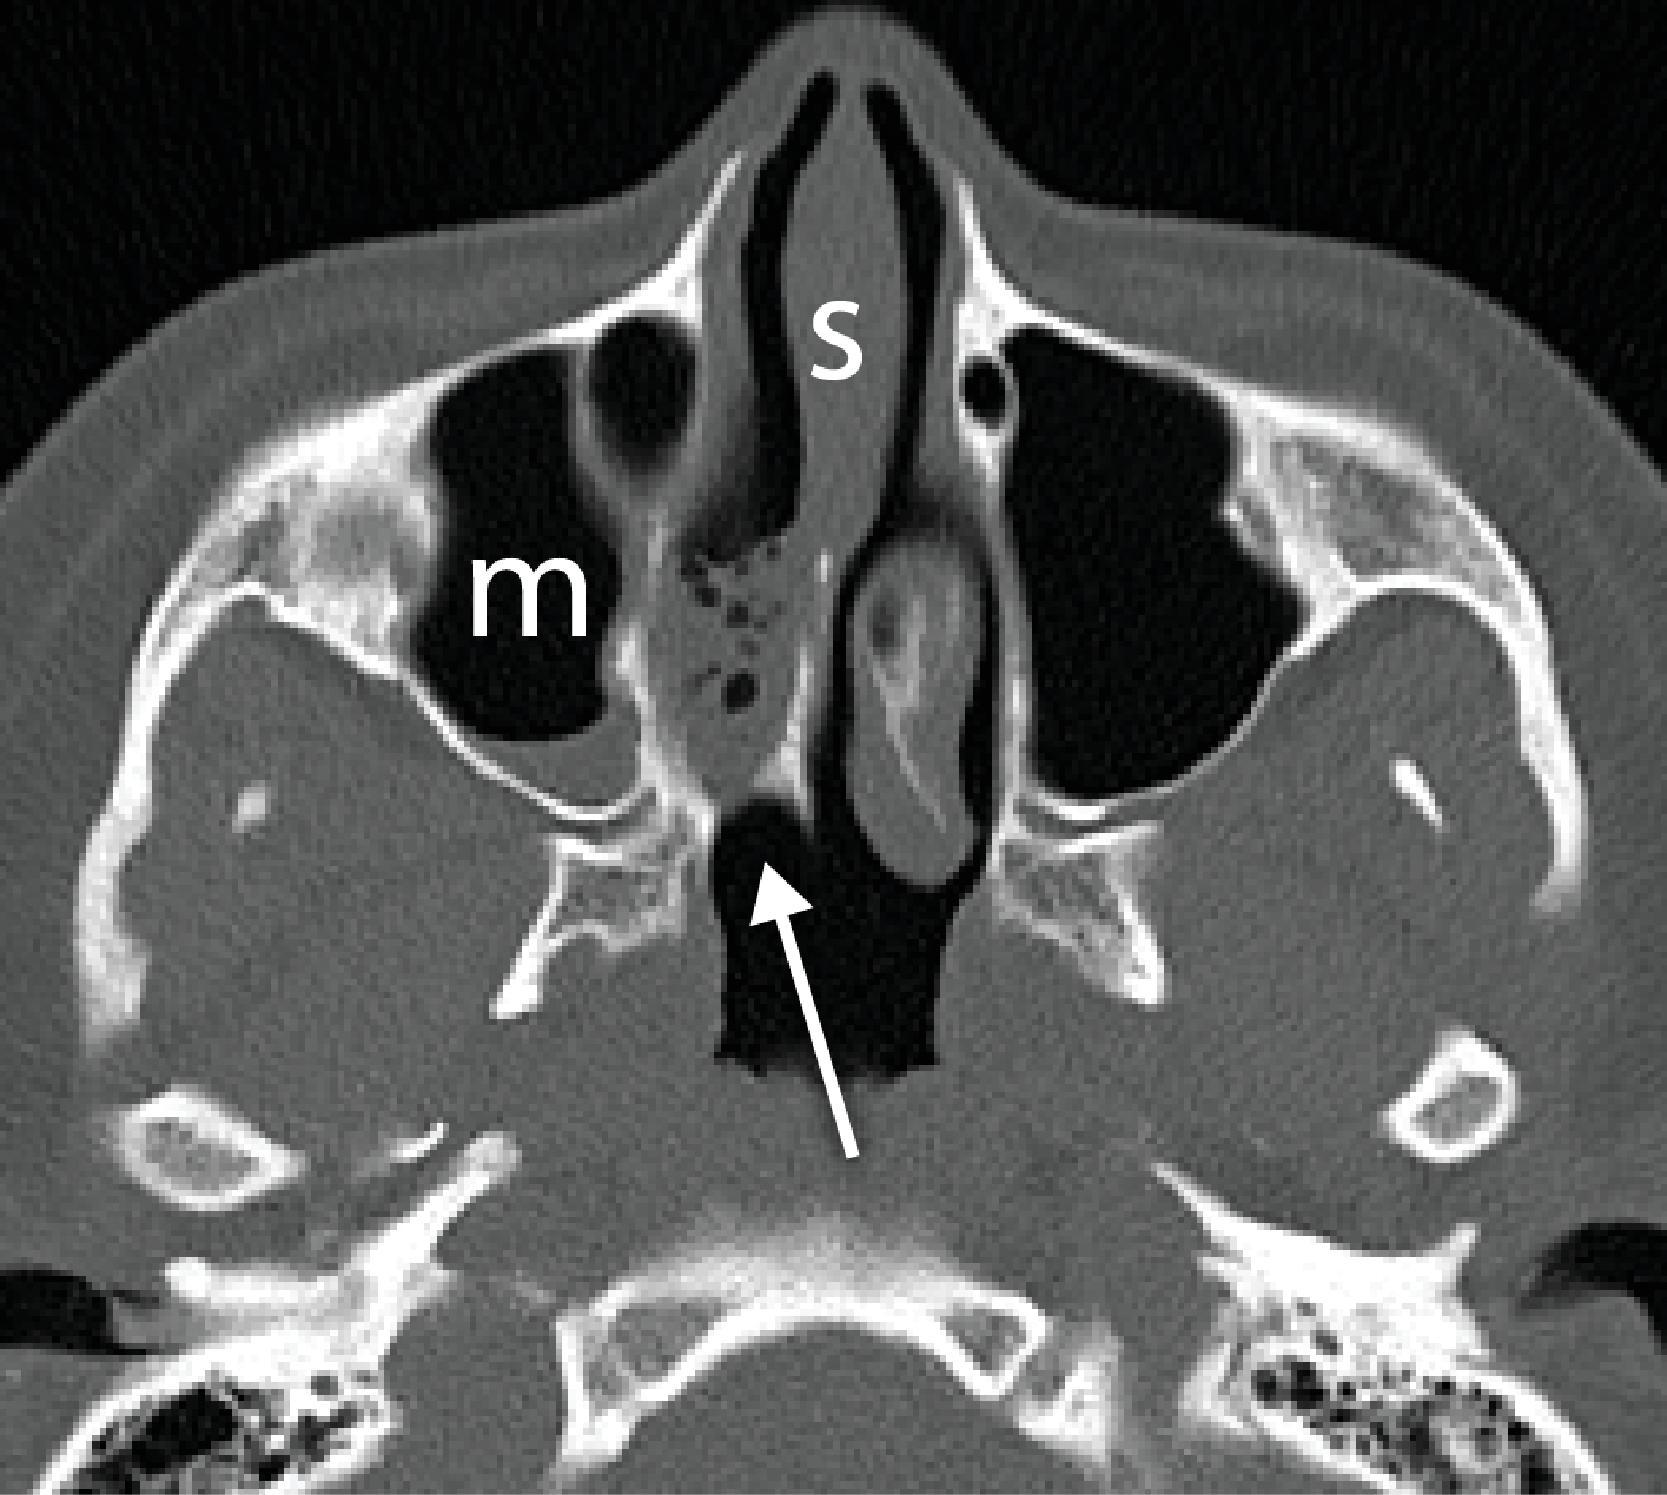 Fig. 2.36, Choanal atresia. Axial computed tomography (CT) image demonstrates choanal stenosis on the right ( arrow ). s , nasal septum; m , Maxillary sinus.